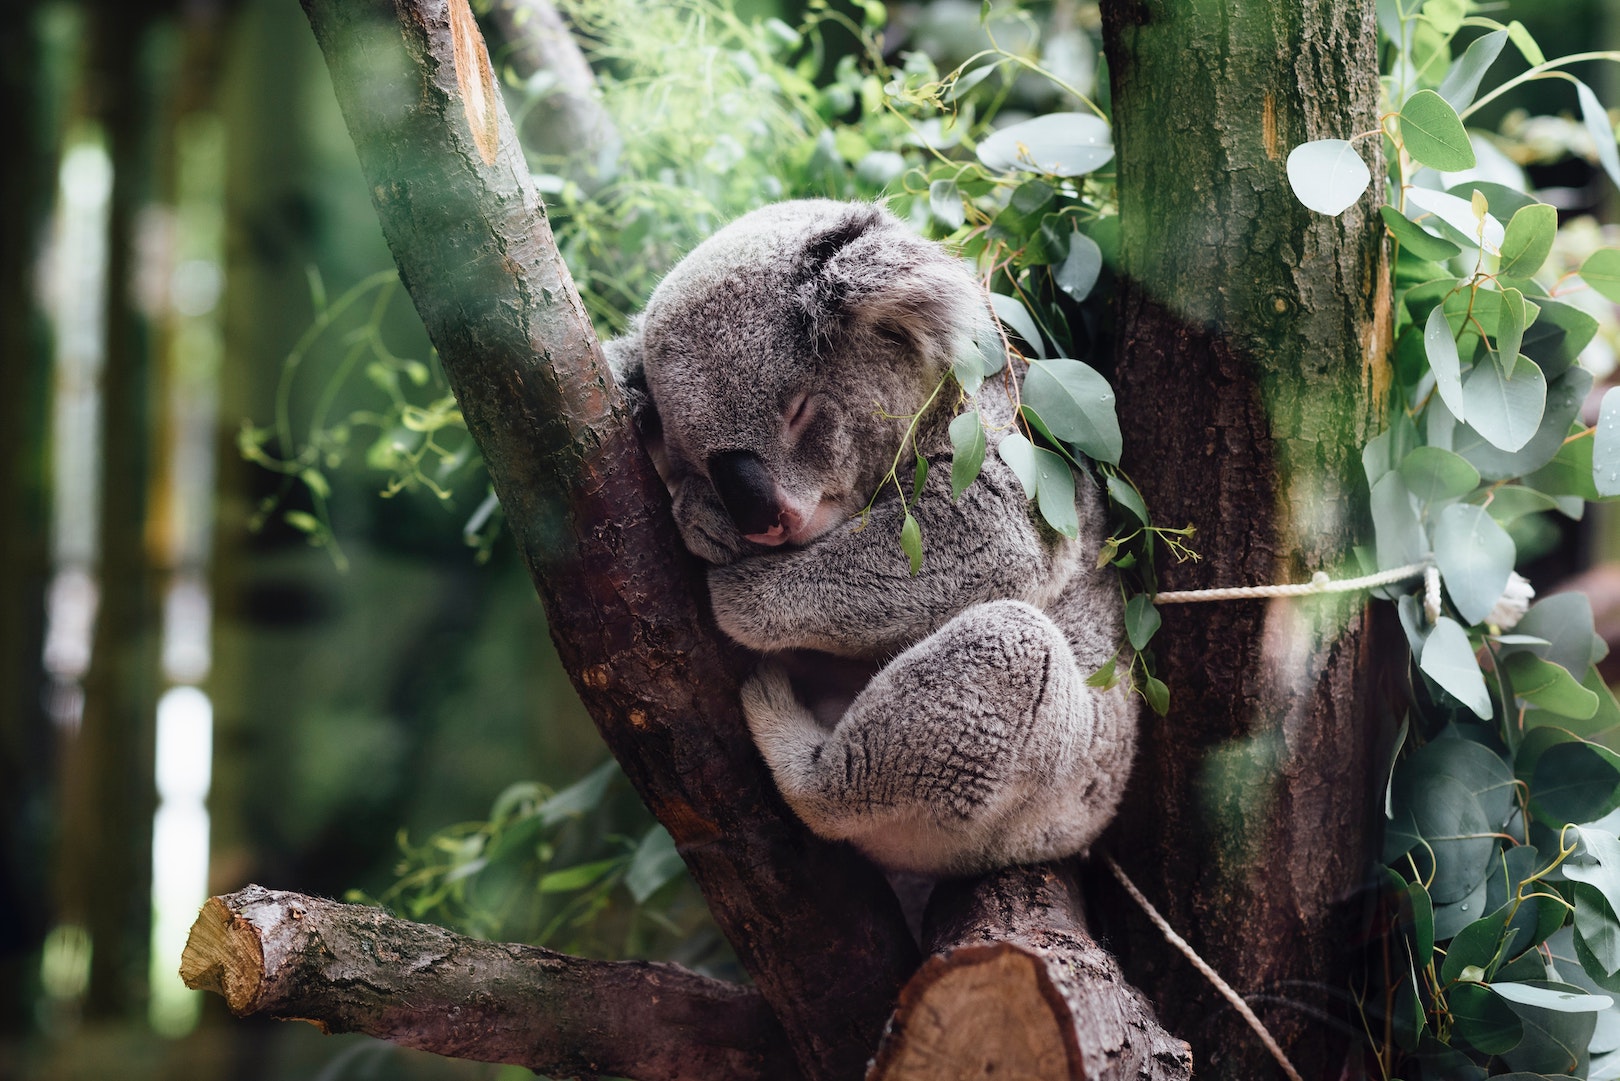 Koala sleeps on a tree. Explore the top victories for animals by Morris Animal Foundation this year. TEDxMileHigh.